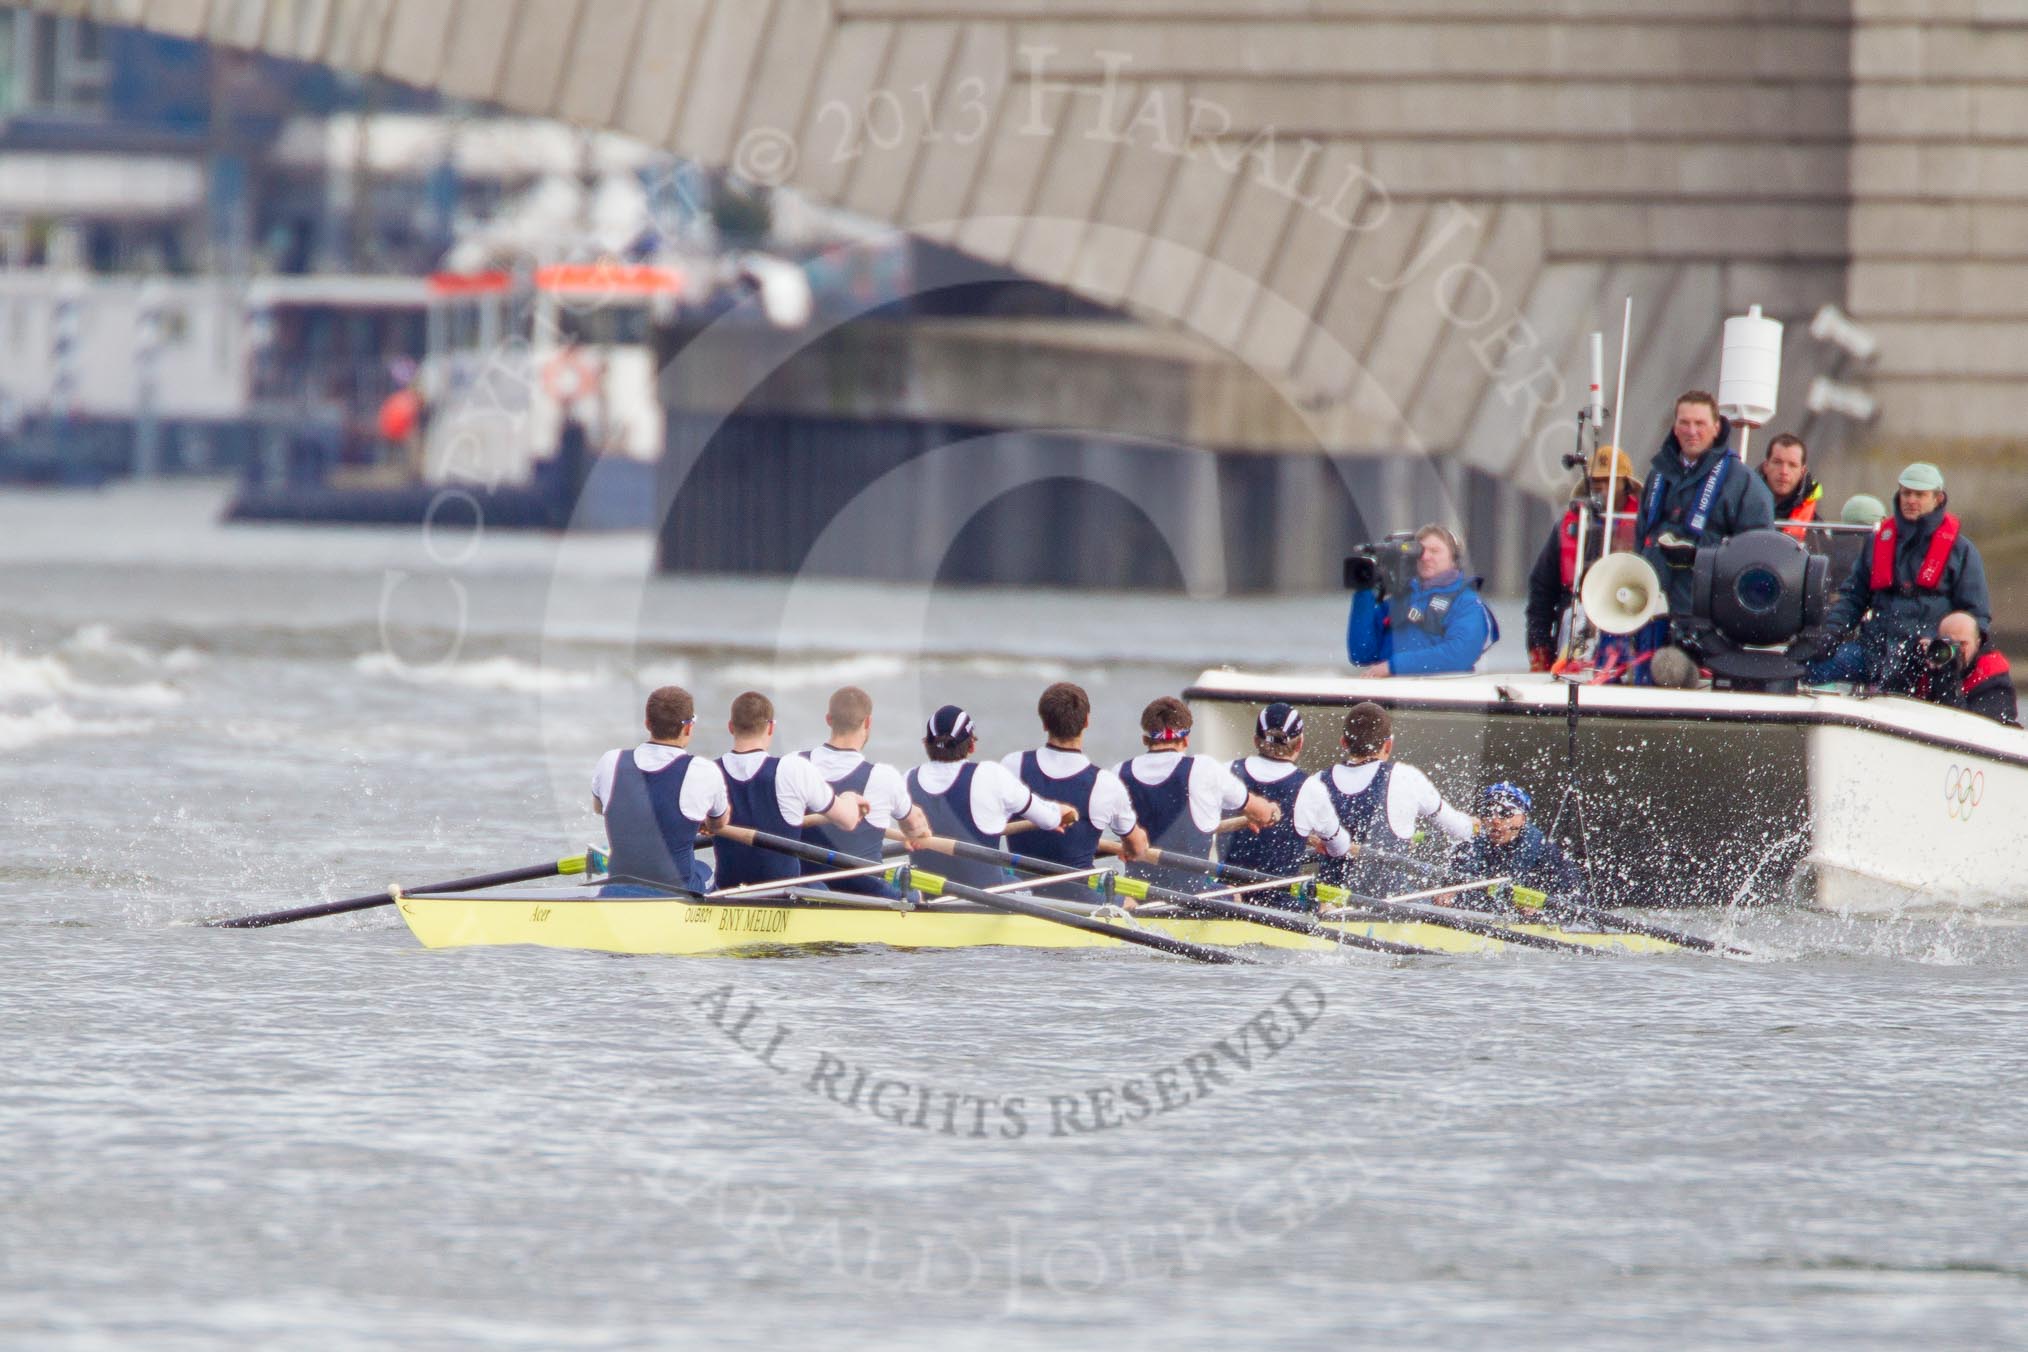 The Boat Race 2013.
Putney,
London SW15,

United Kingdom,
on 31 March 2013 at 16:31, image #265